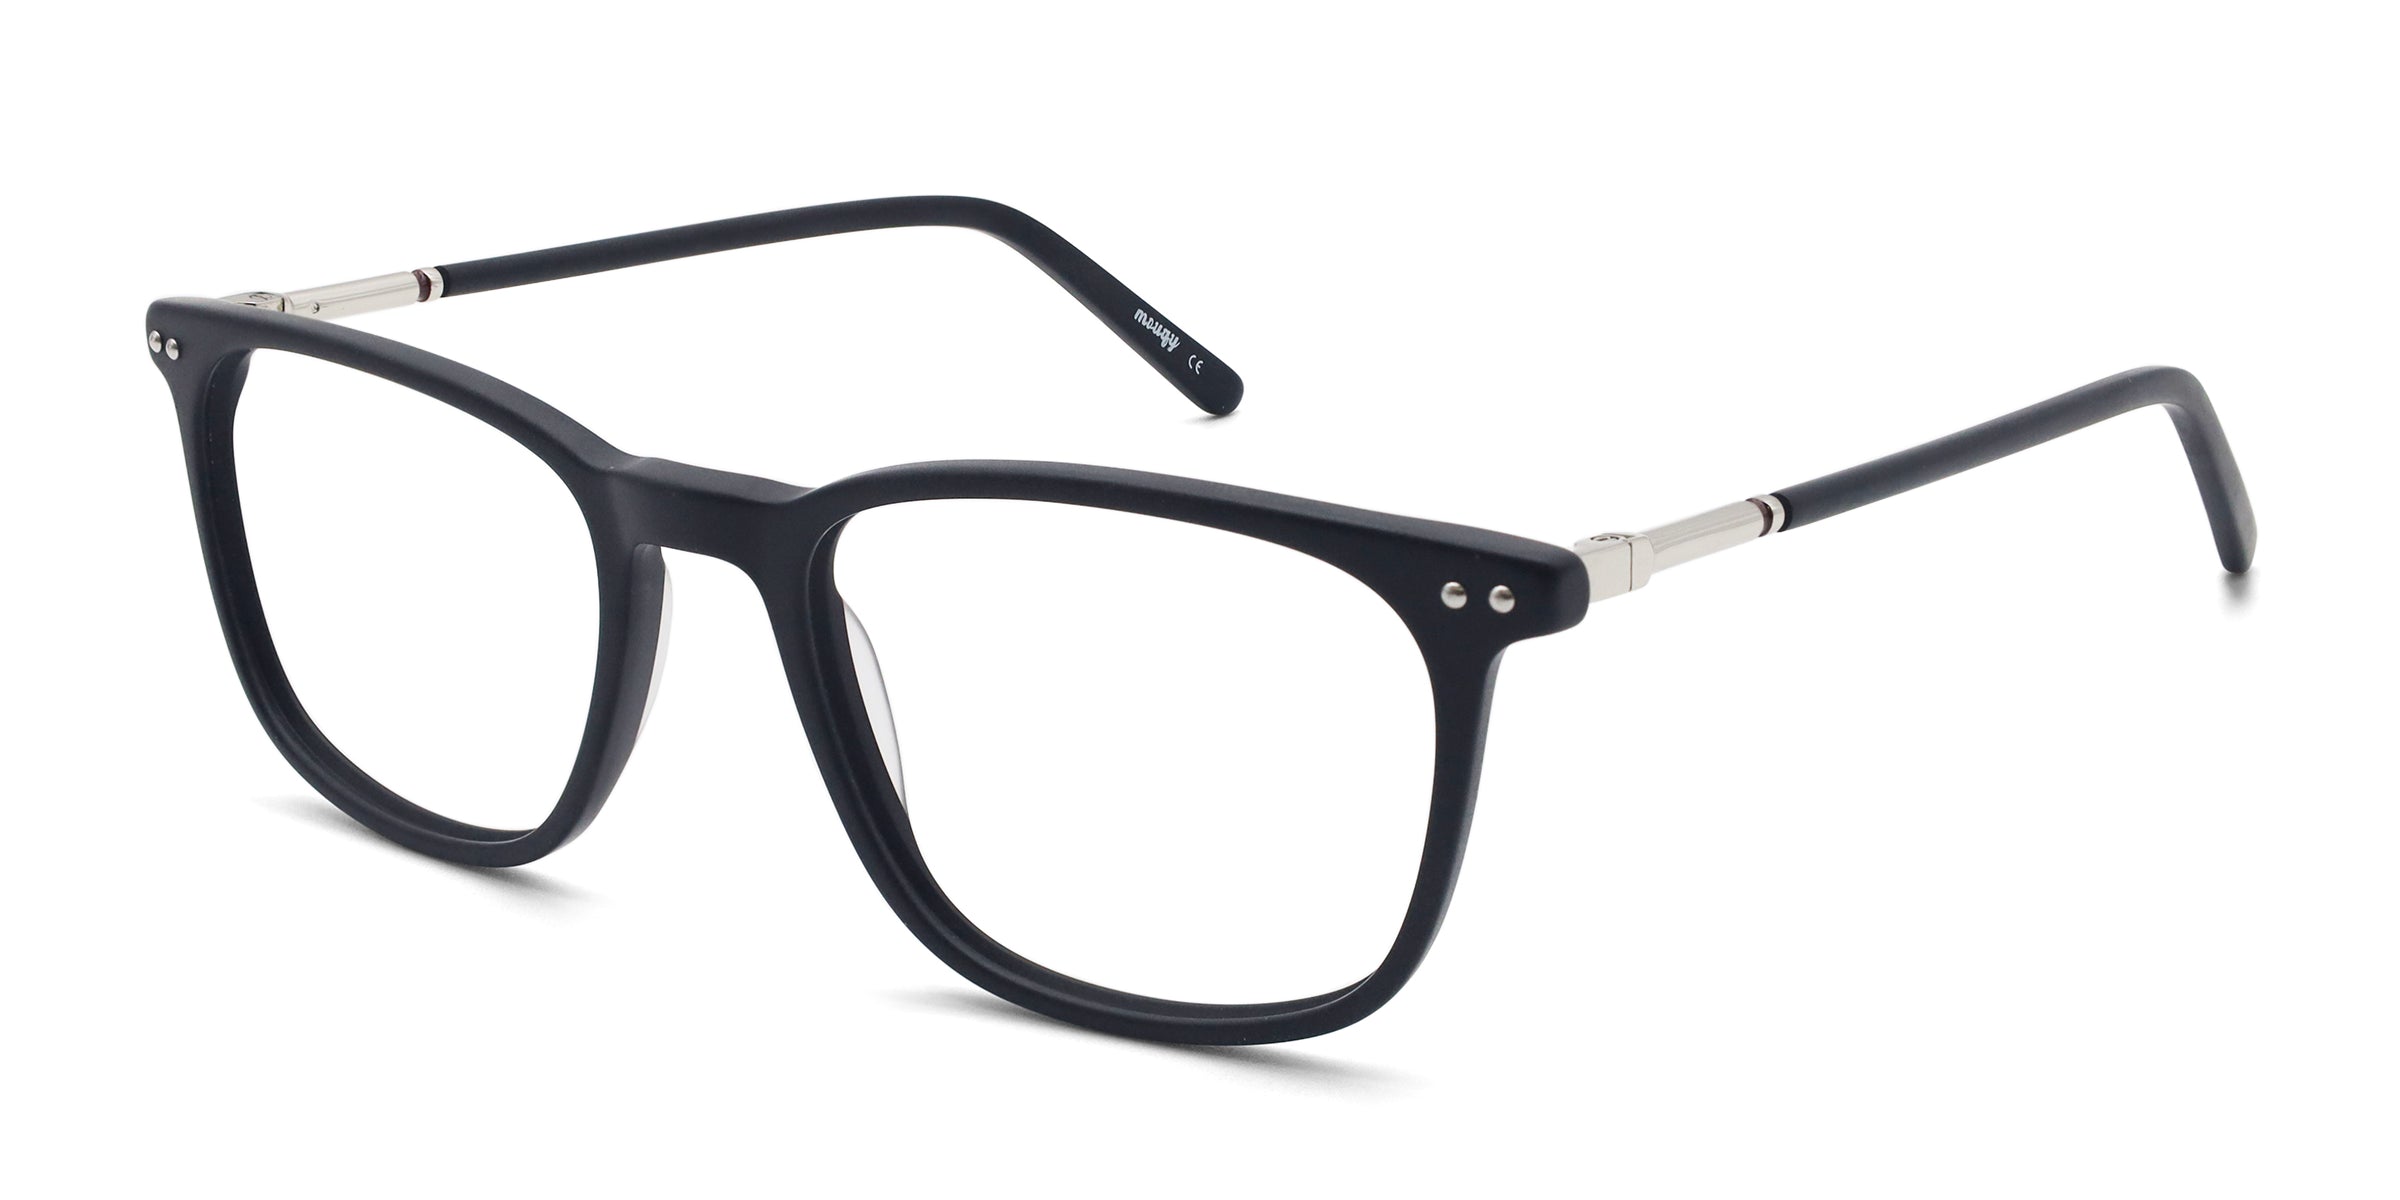 Queen Square Black eyeglasses frames angled view